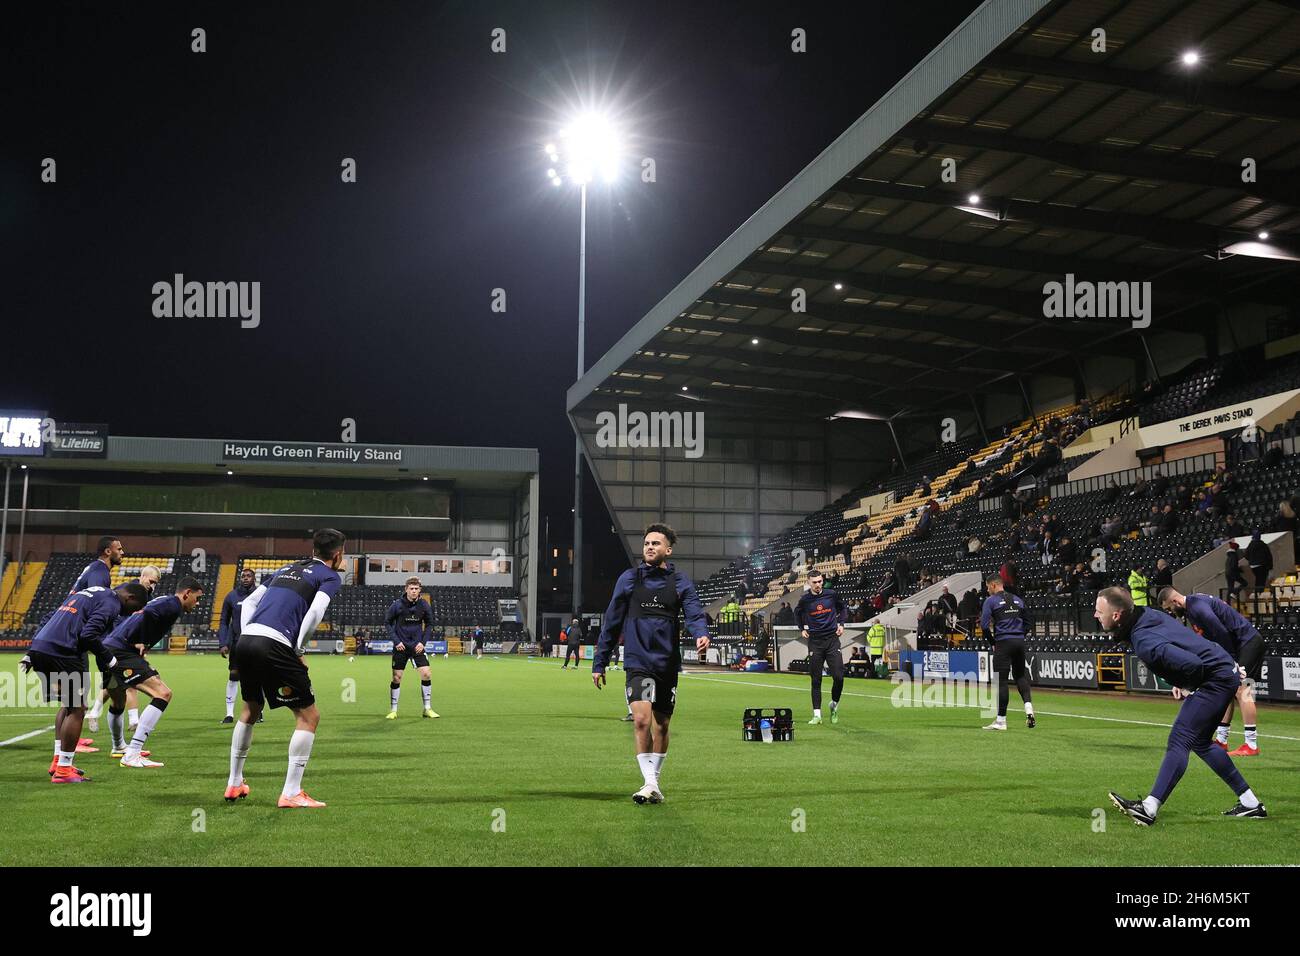 NOTTINGHAM, UK. NOVEMBER 16TH. Notts County players warm up ahead of the Emirates FA Cup 1st round replay match between Notts County and Rochdale at Meadow Lane Stadium, Nottingham on Tuesday 16th November 2021. (Credit: James Holyoak) Stock Photo